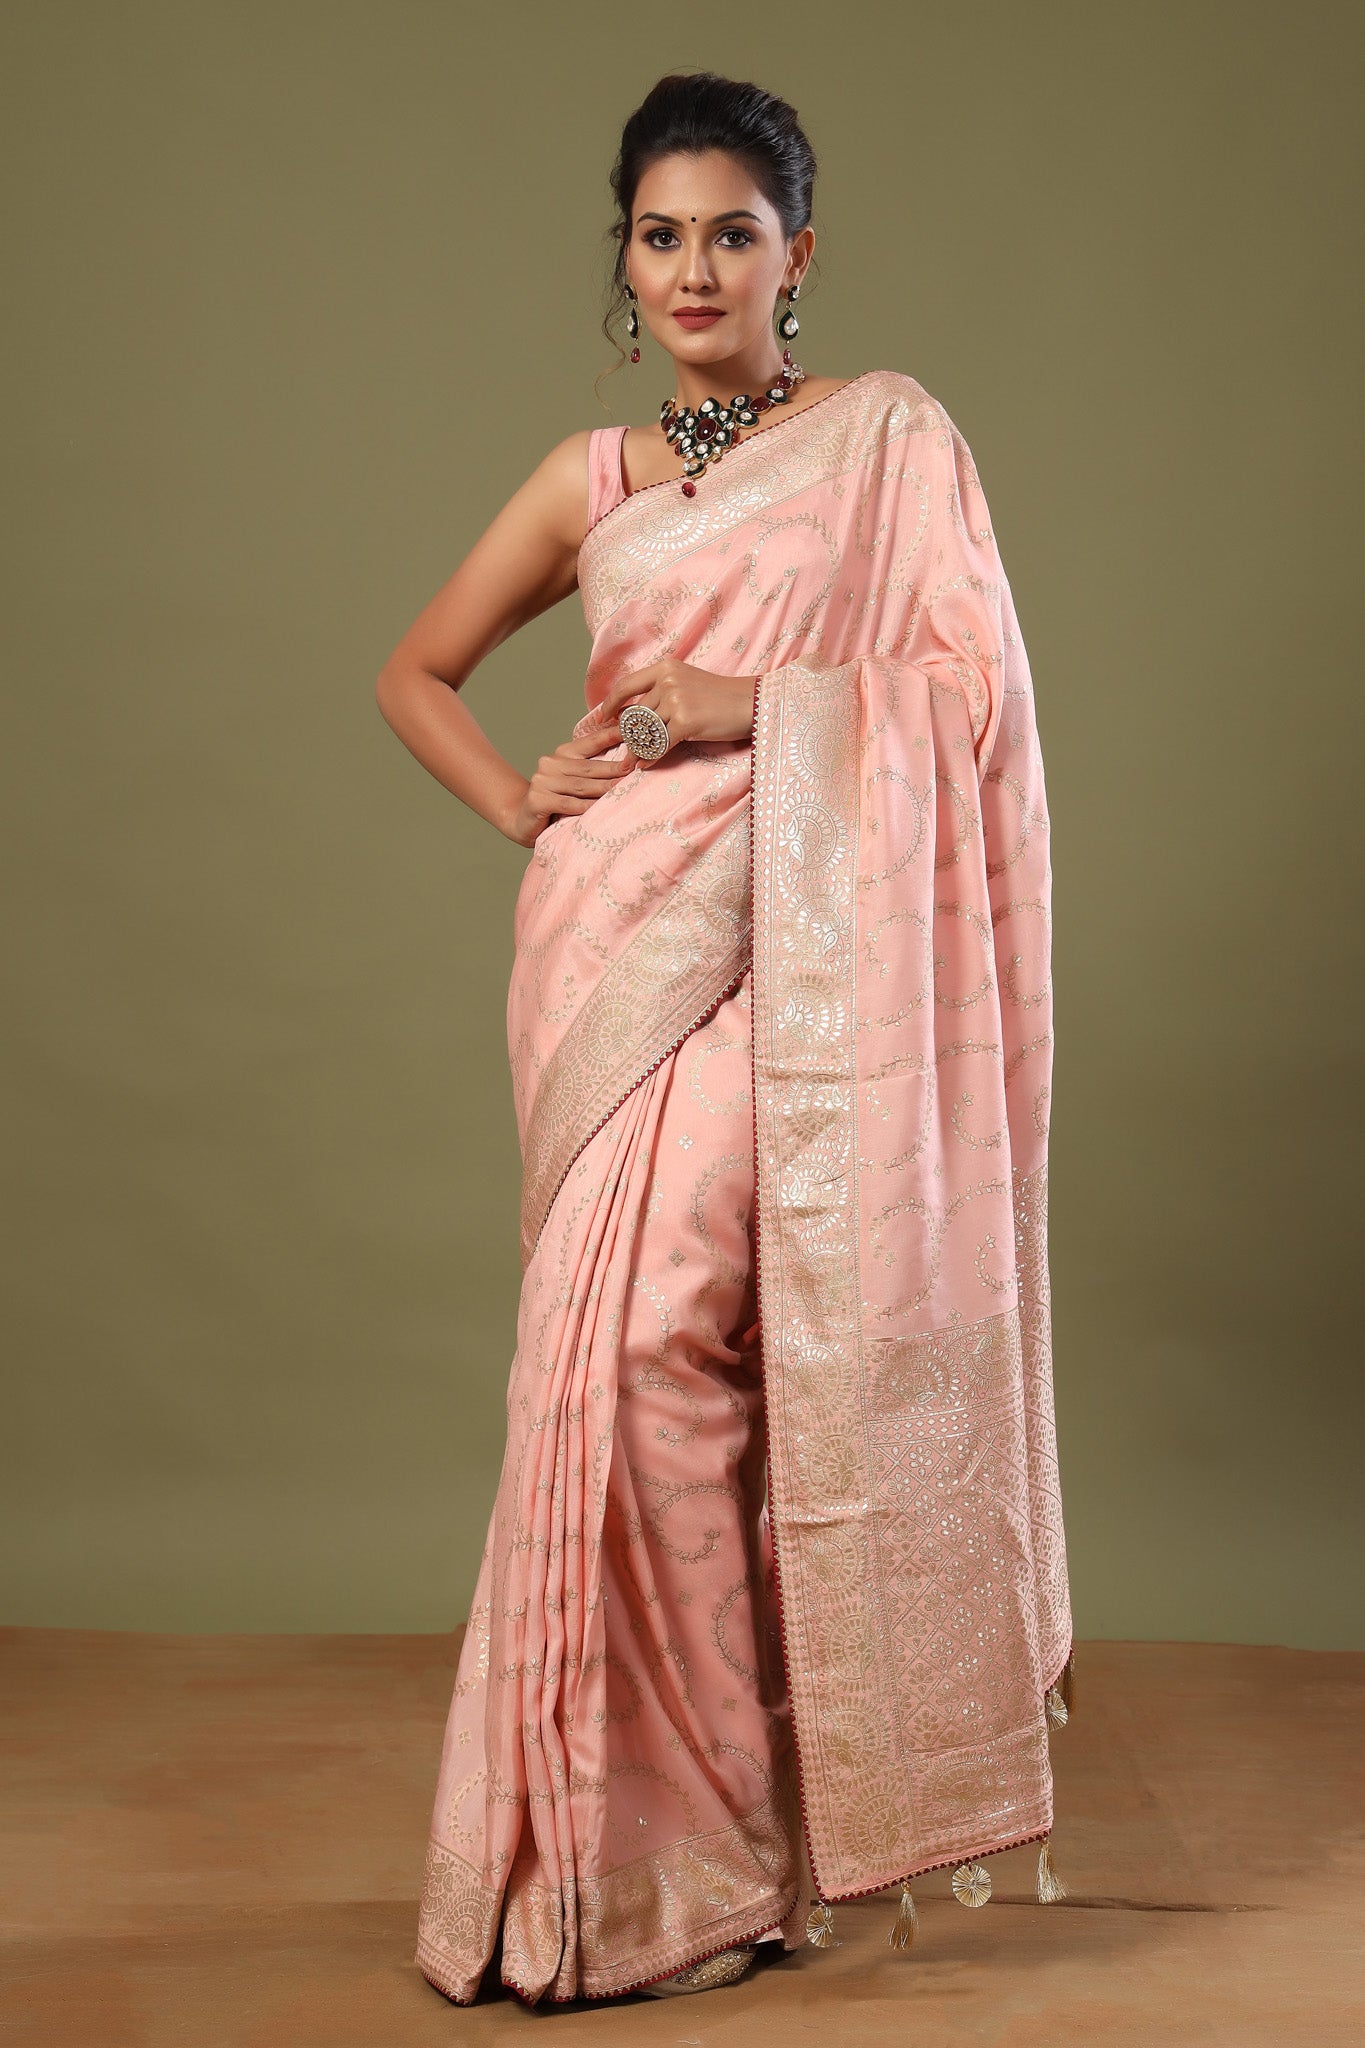 Buy beautiful light pink tussar georgette sari online in USA. Make a fashion statement at weddings with stunning designer sarees, embroidered sarees with blouse, wedding sarees, handloom sarees from Pure Elegance Indian fashion store in USA.-saree